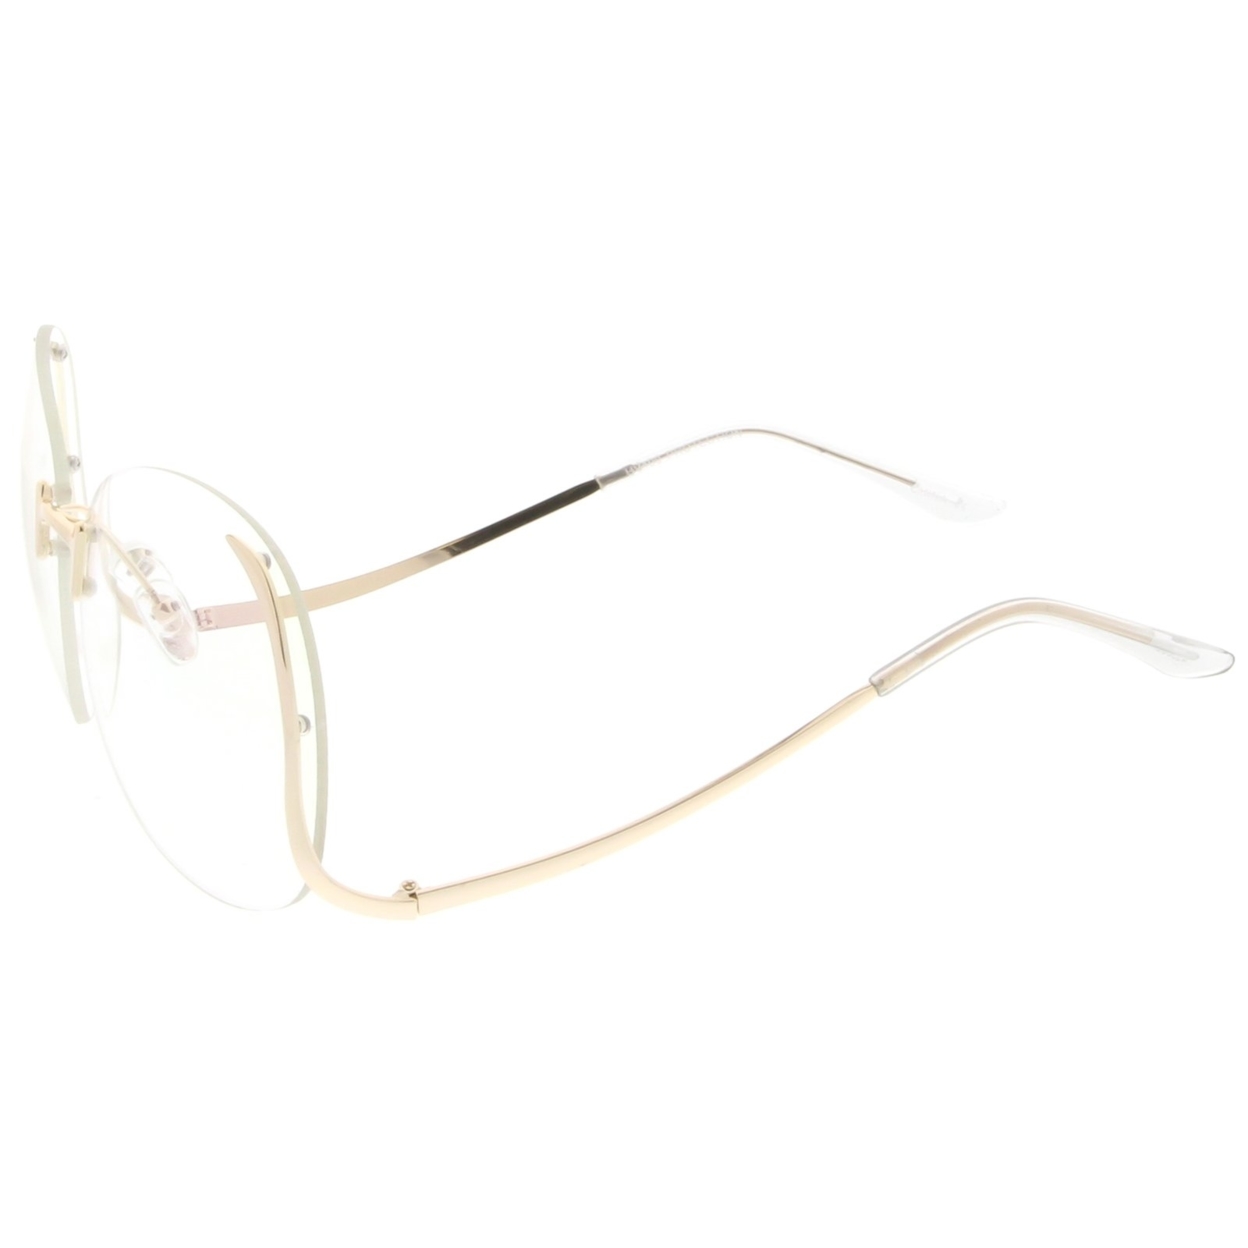 Women's Rimless Curved Metal Arms Round Clear Lens Oversize Eyeglasses 67mm - Gold / Clear